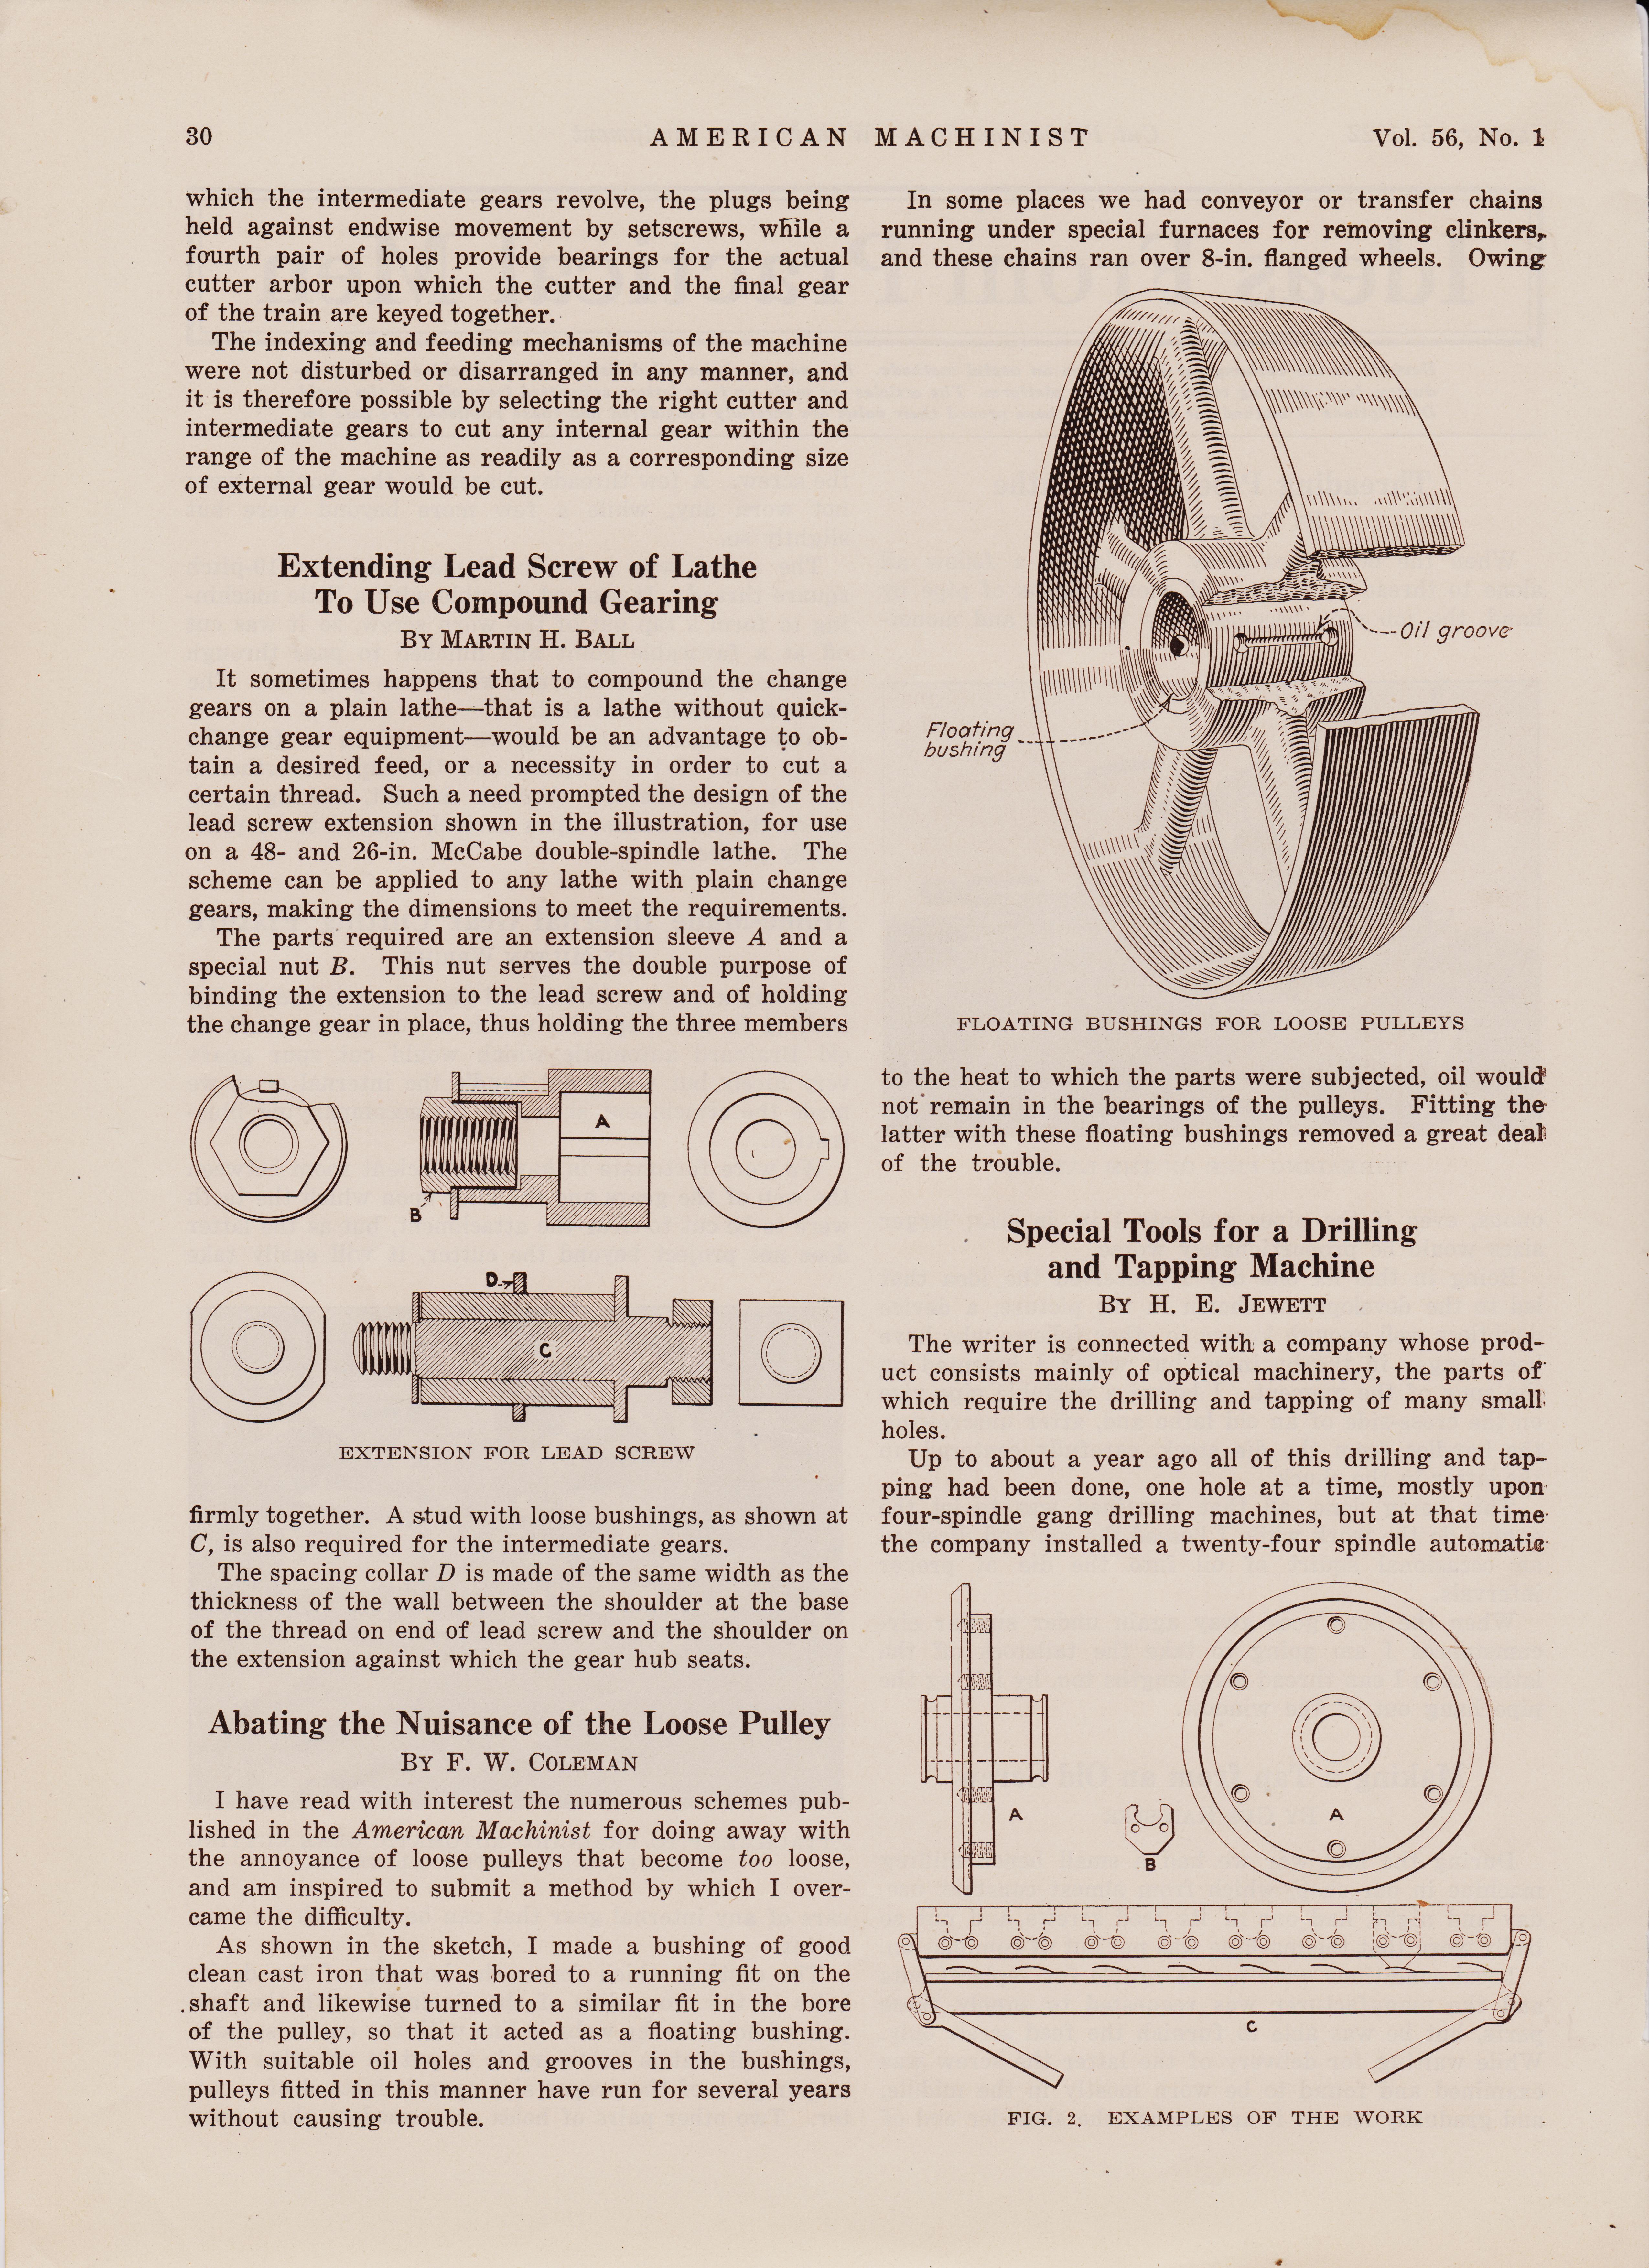 American-Machinist-January-5-1922-pg-30-Make-a-Lathe-Use-Compound-Gearing-vol-56-no-1.jpg